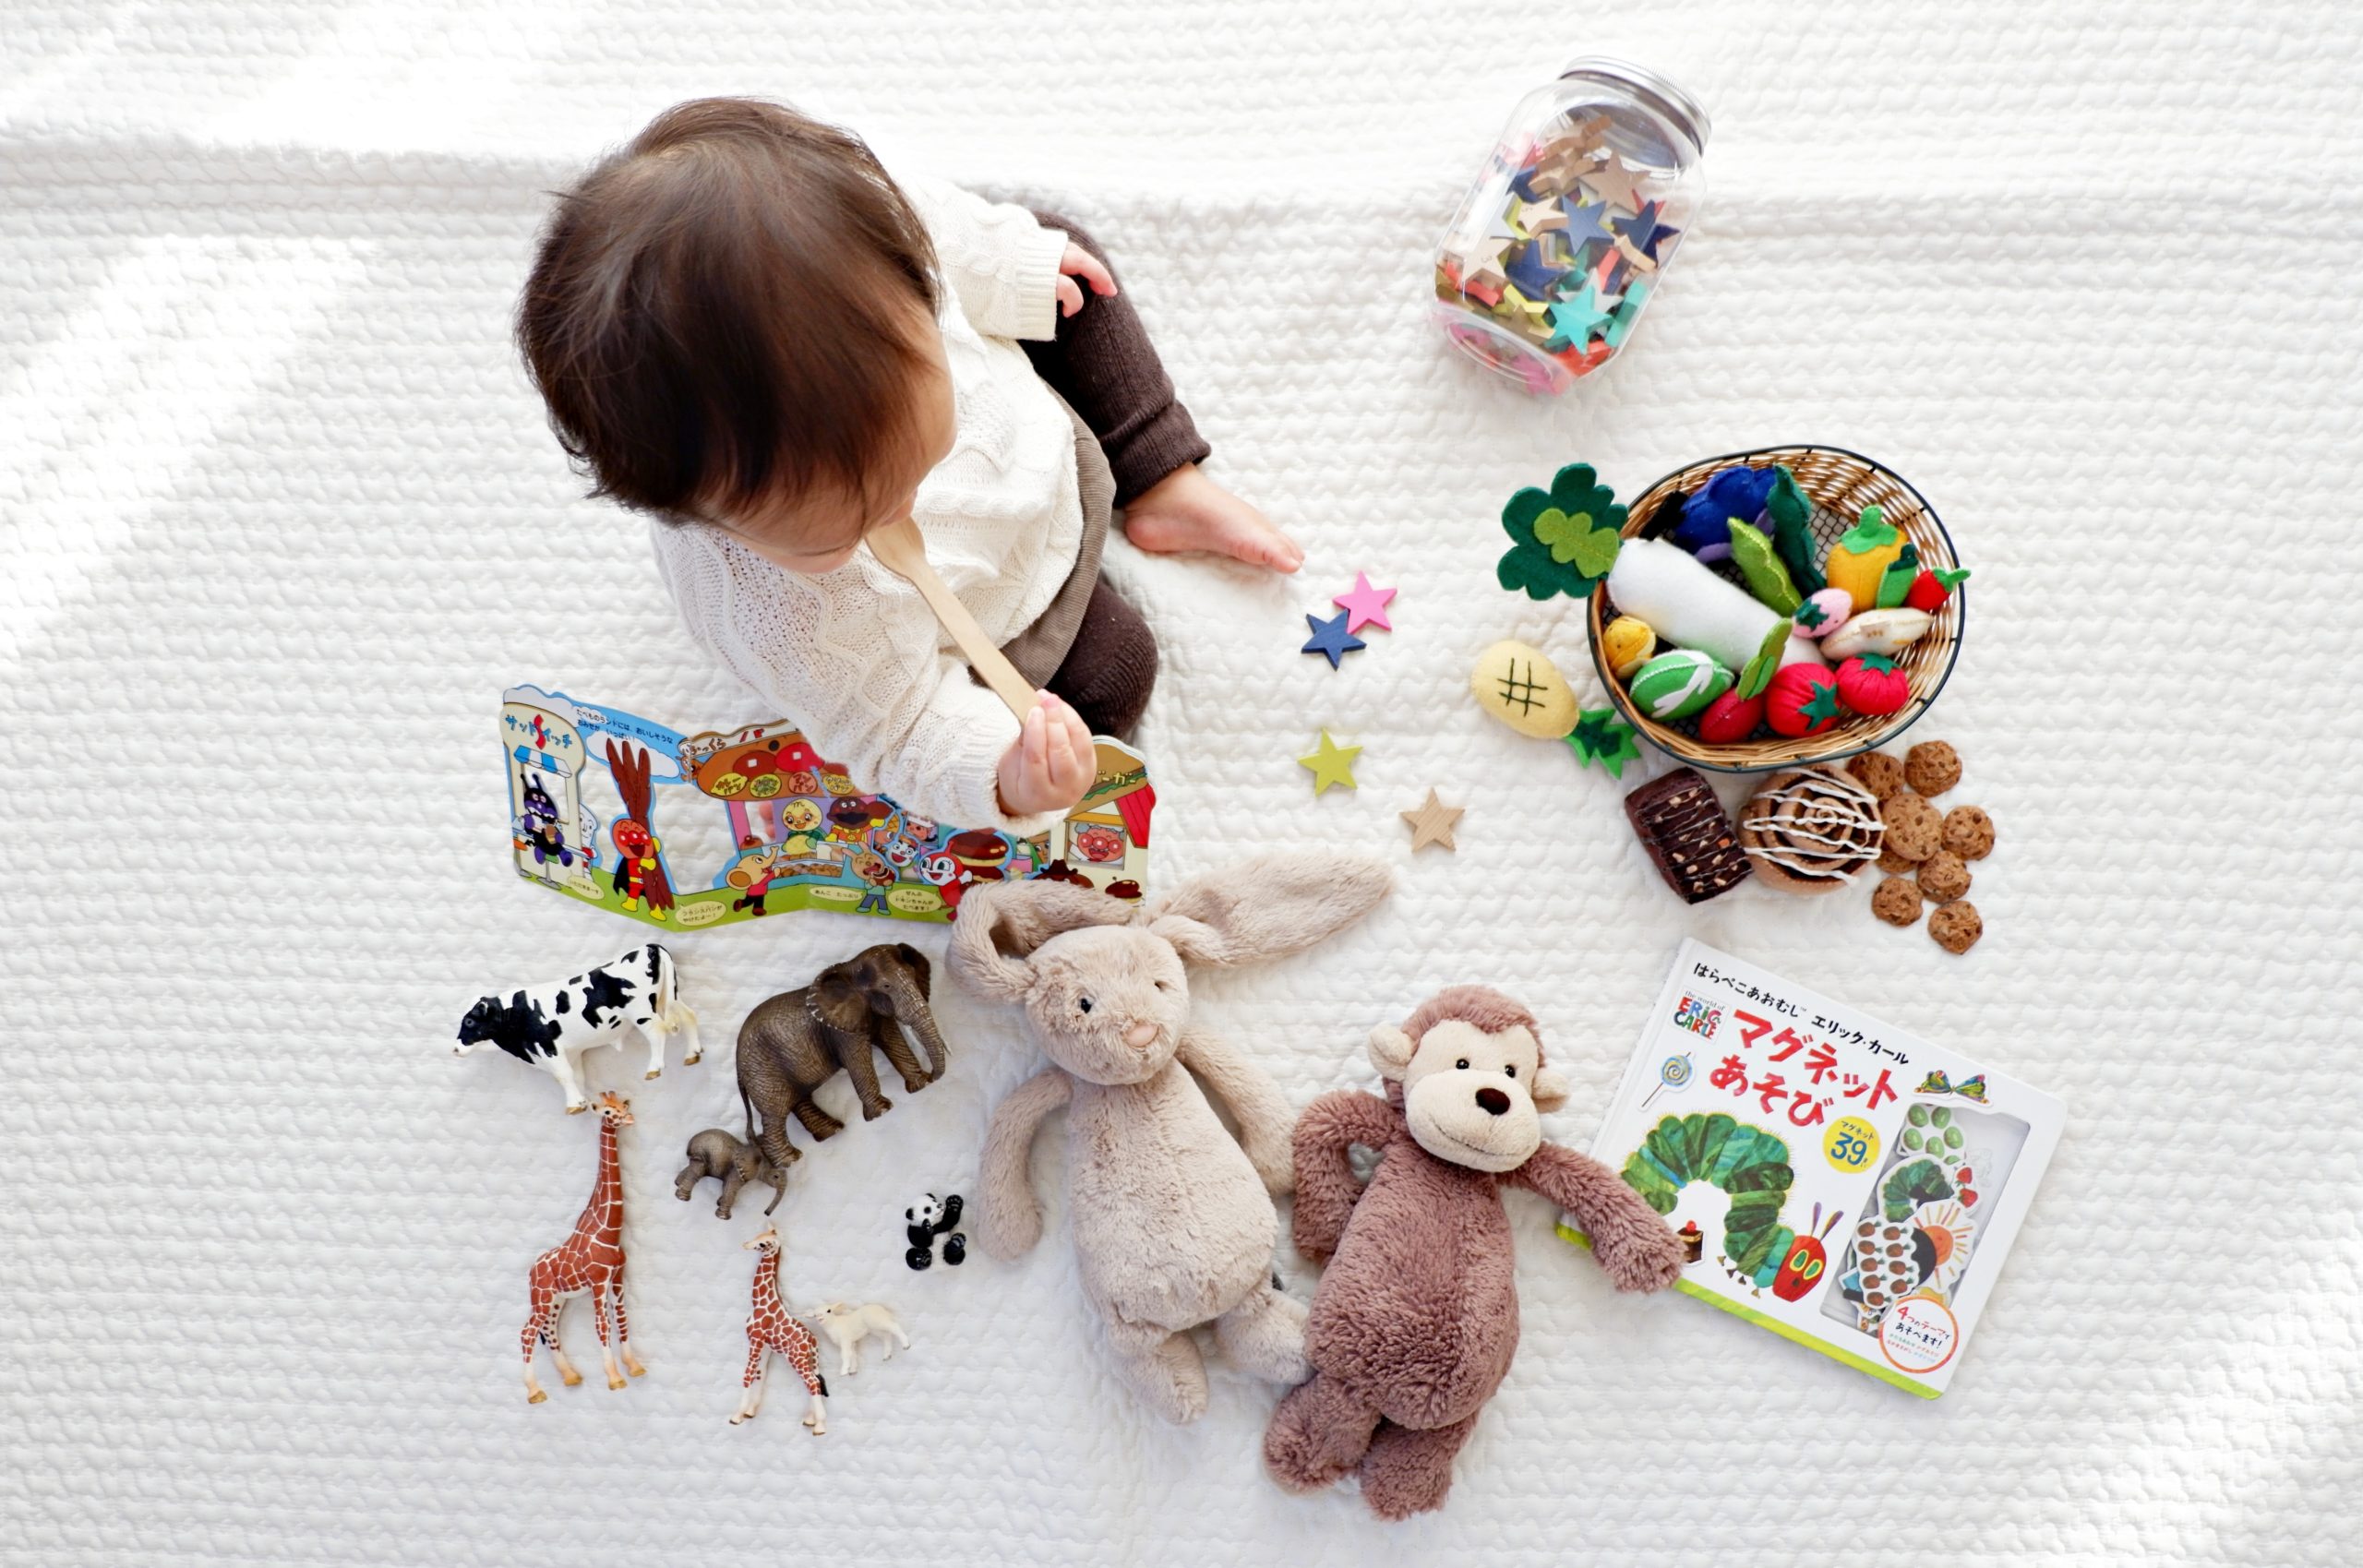 Baby sitting on floor with toys.